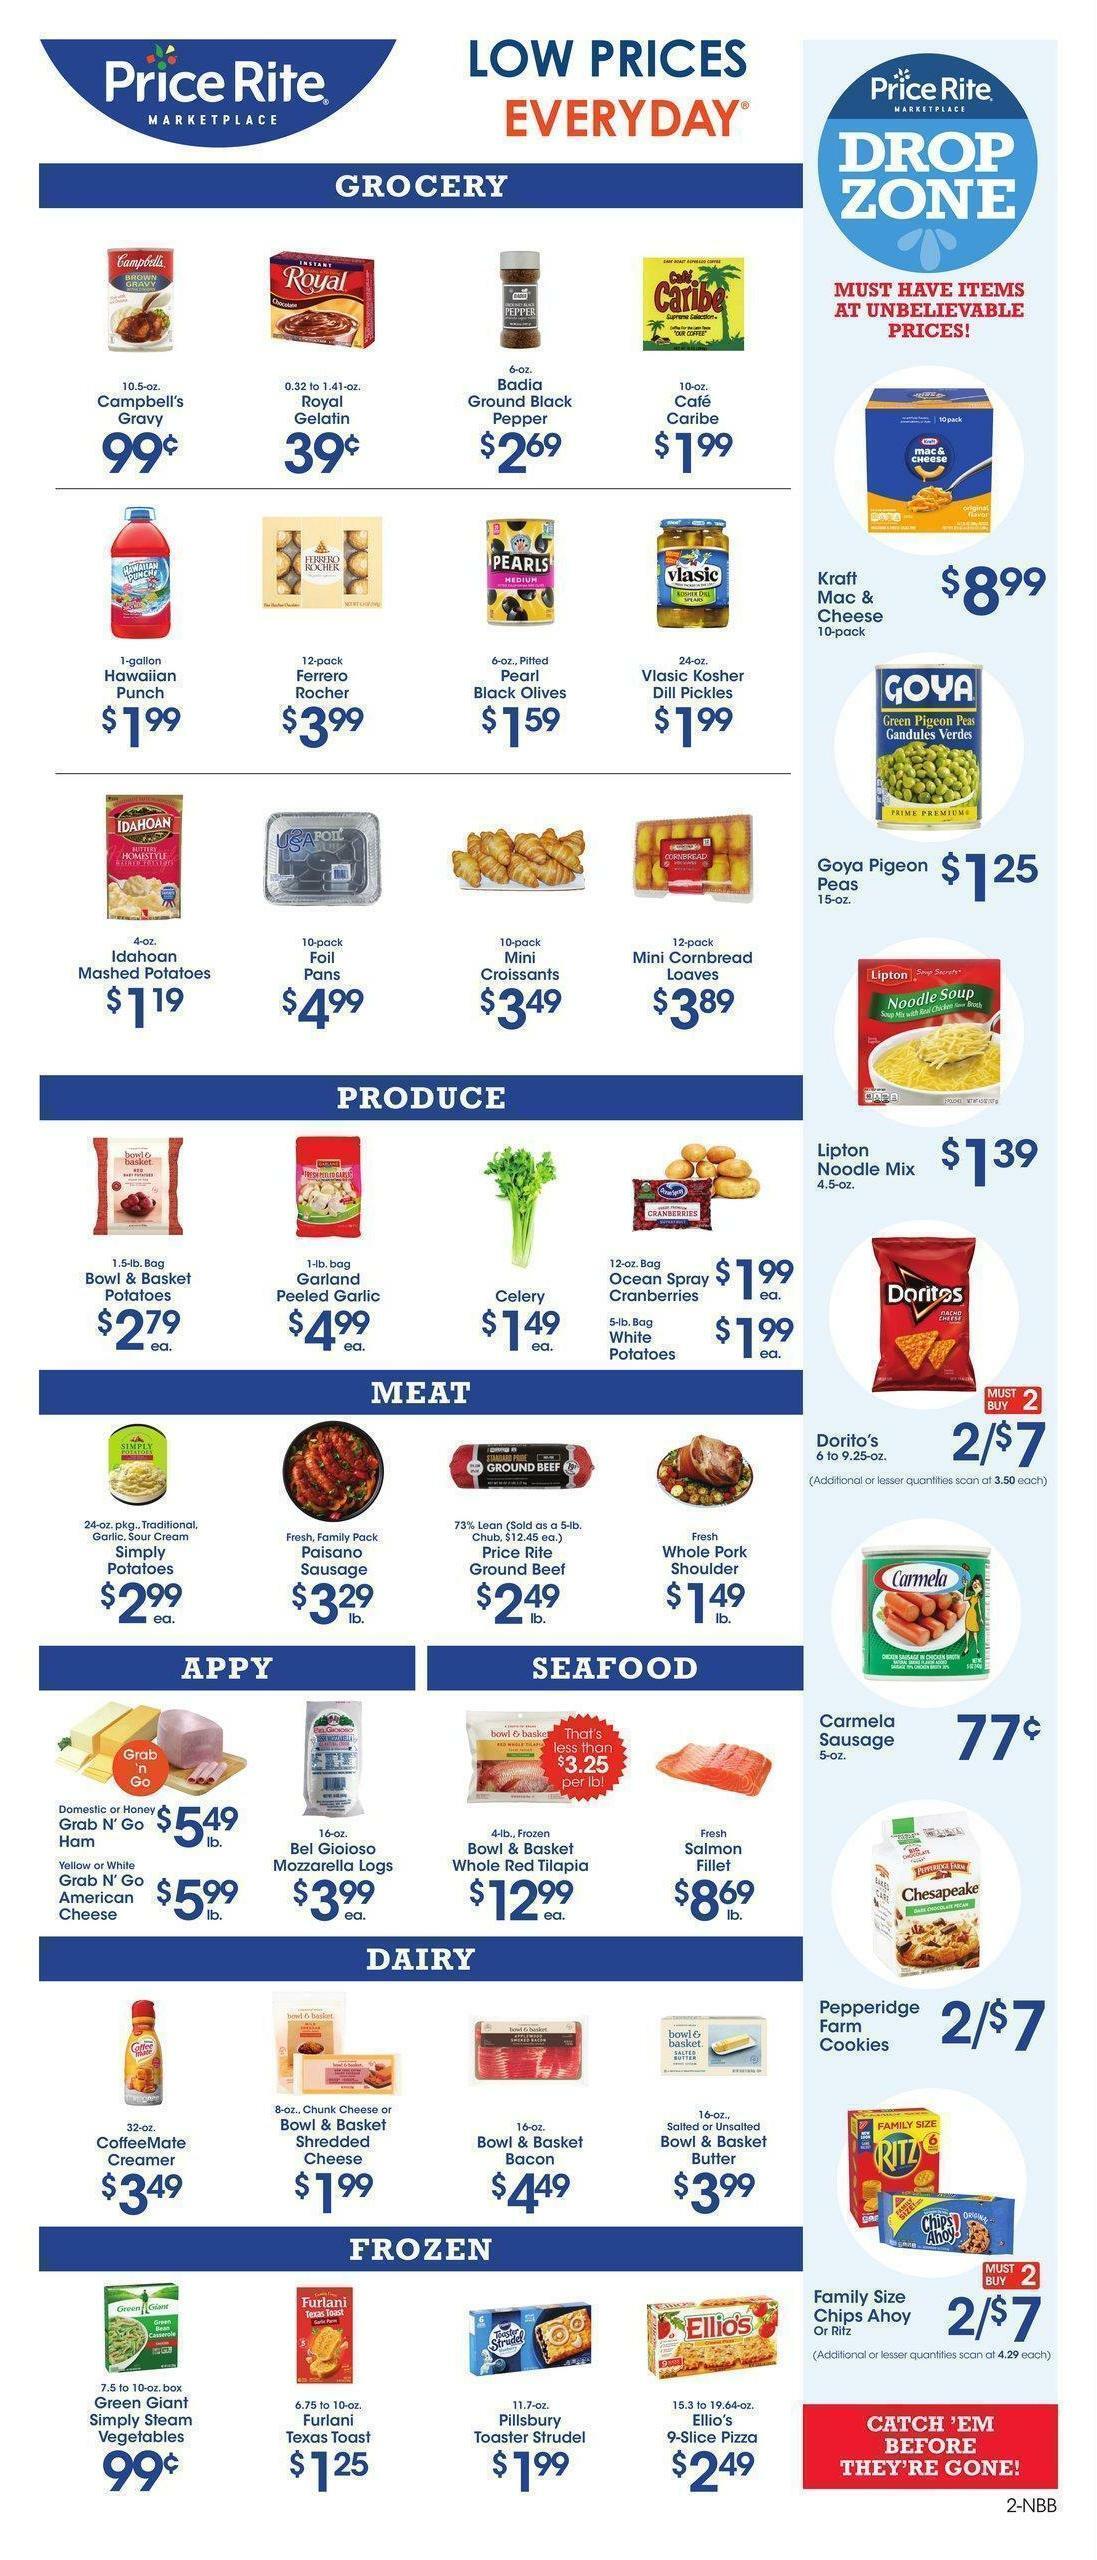 Price Rite Weekly Ad from November 11